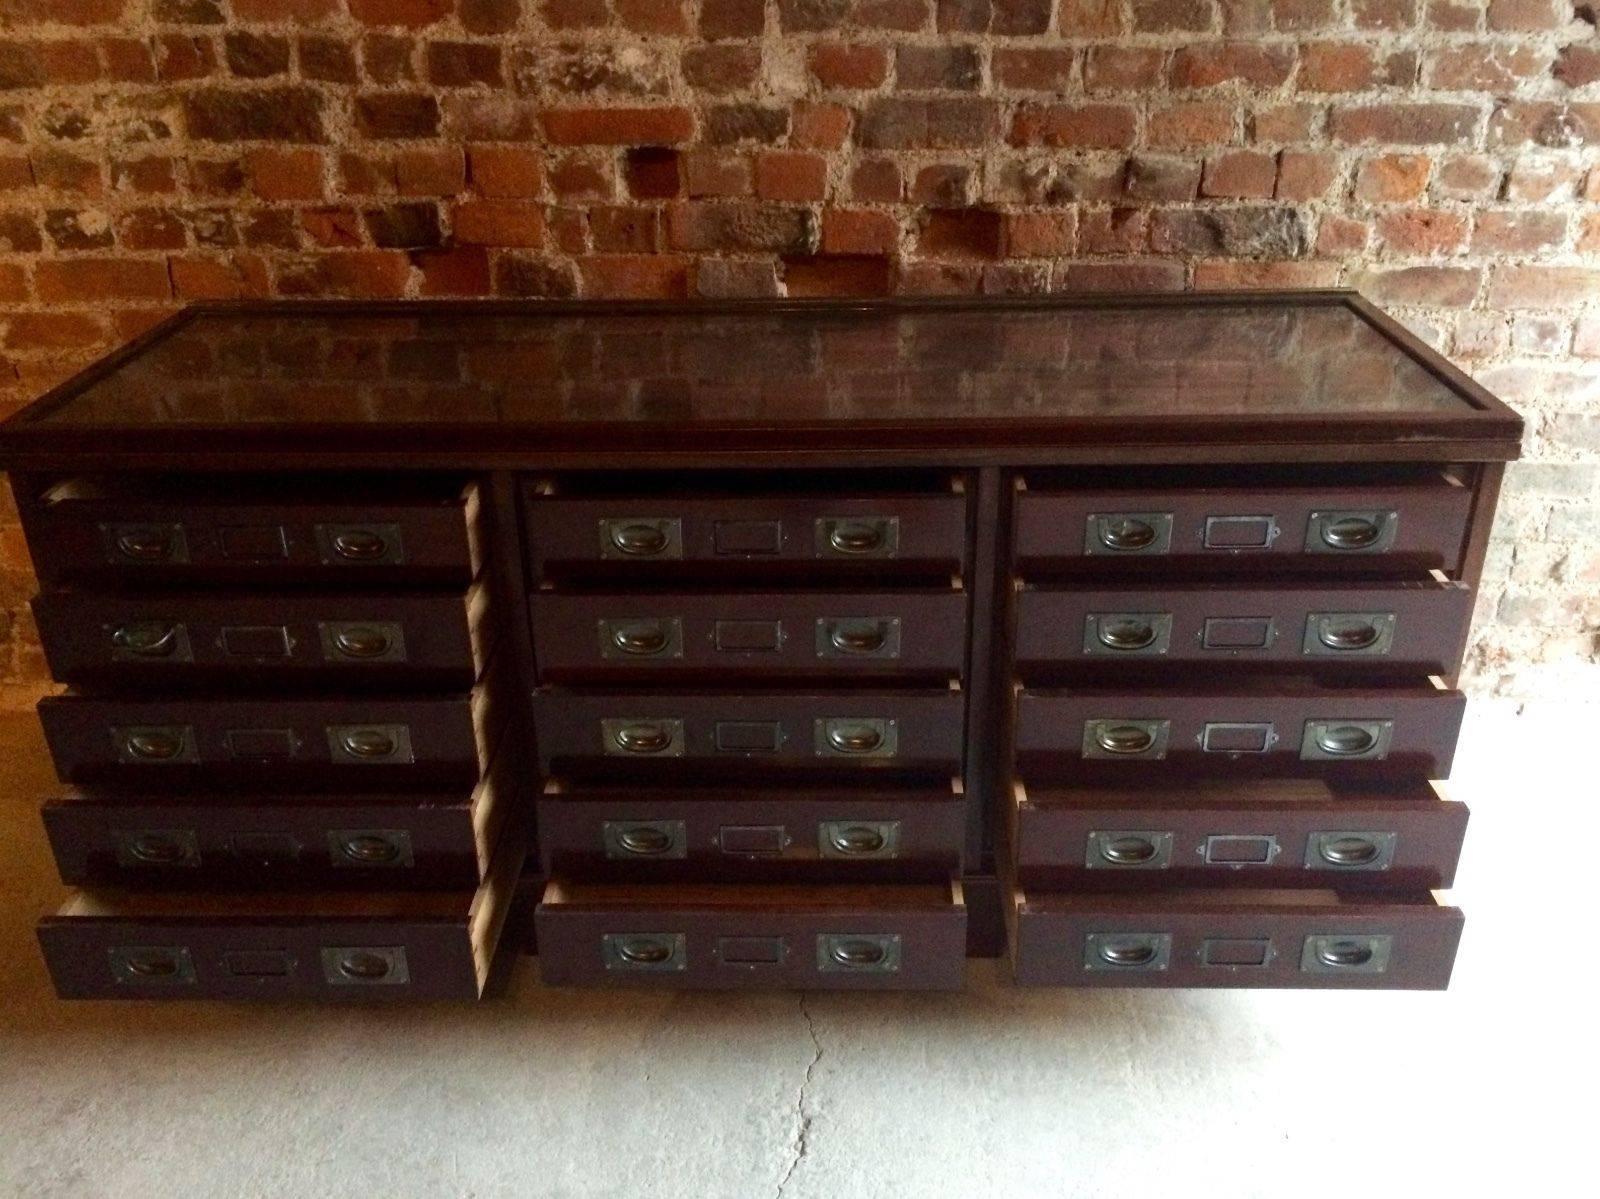 A beautiful early 20th century extremely large shop haberdashery solid mahogany 15 drawer shop counter with lift up glass top. There are three doors covering the drawers (these have been removed and can be reattached if needed), large rectangular